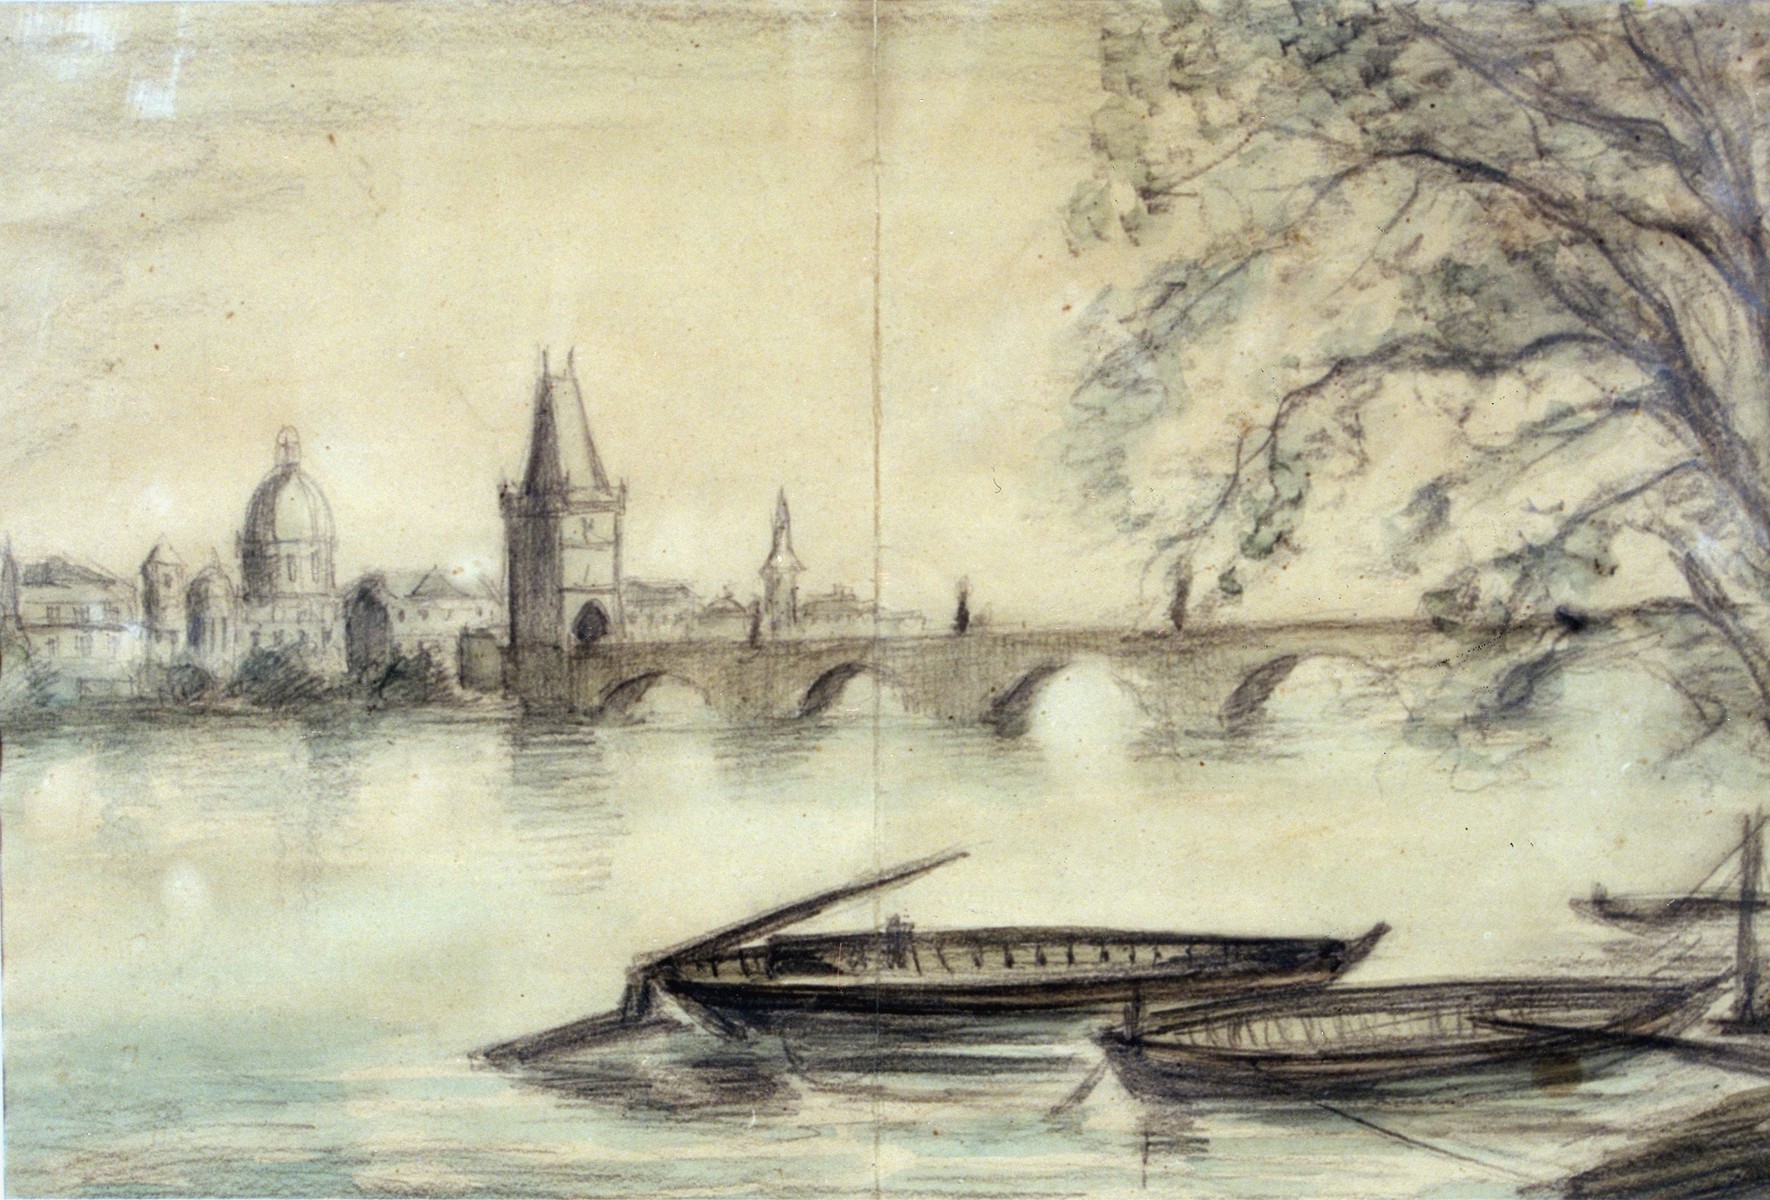 Painting of the Vltava River in Prague drawn from a photograph by Theresienstadt prisoner Bedrich Fritta.